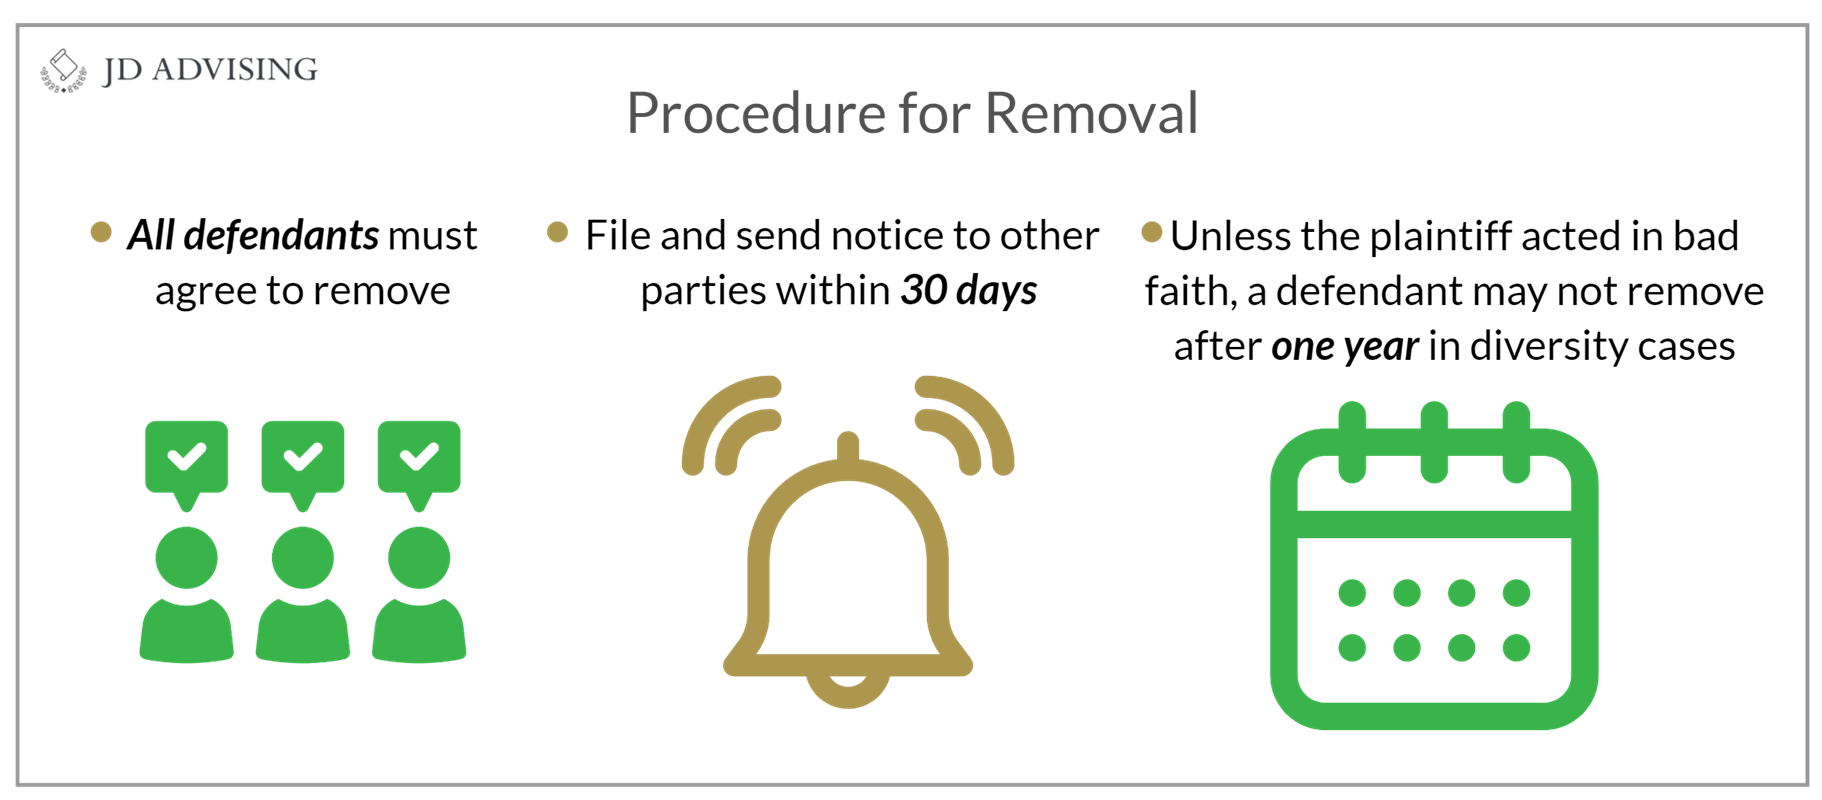 Procedure for Removal